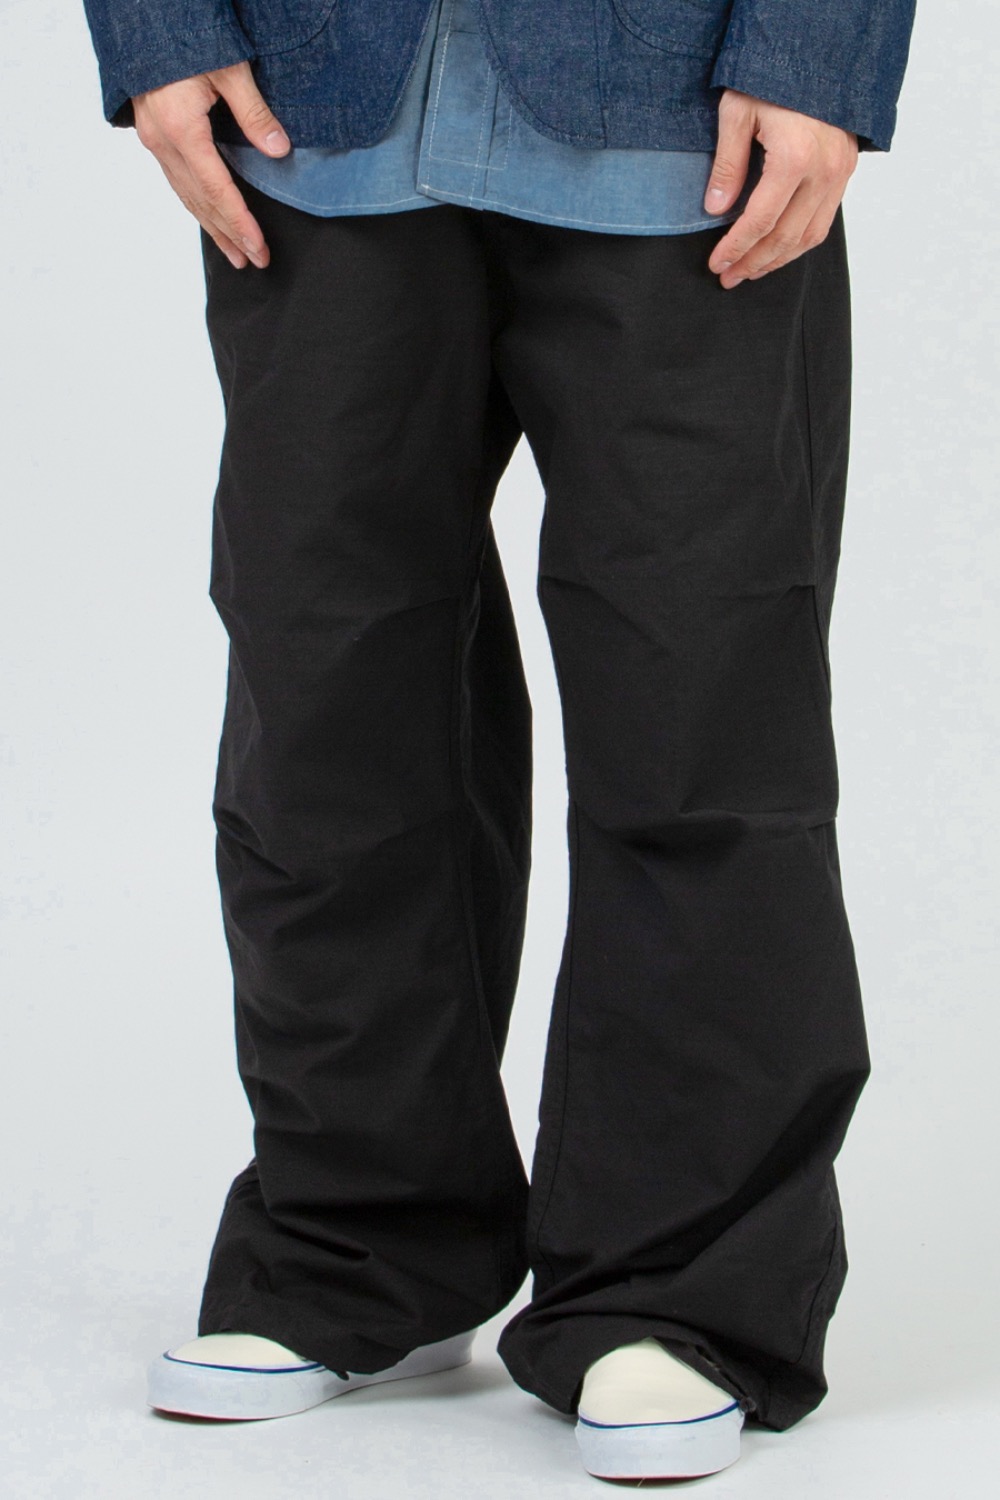 OVER PANT BLACK COTTON RIPSTOP